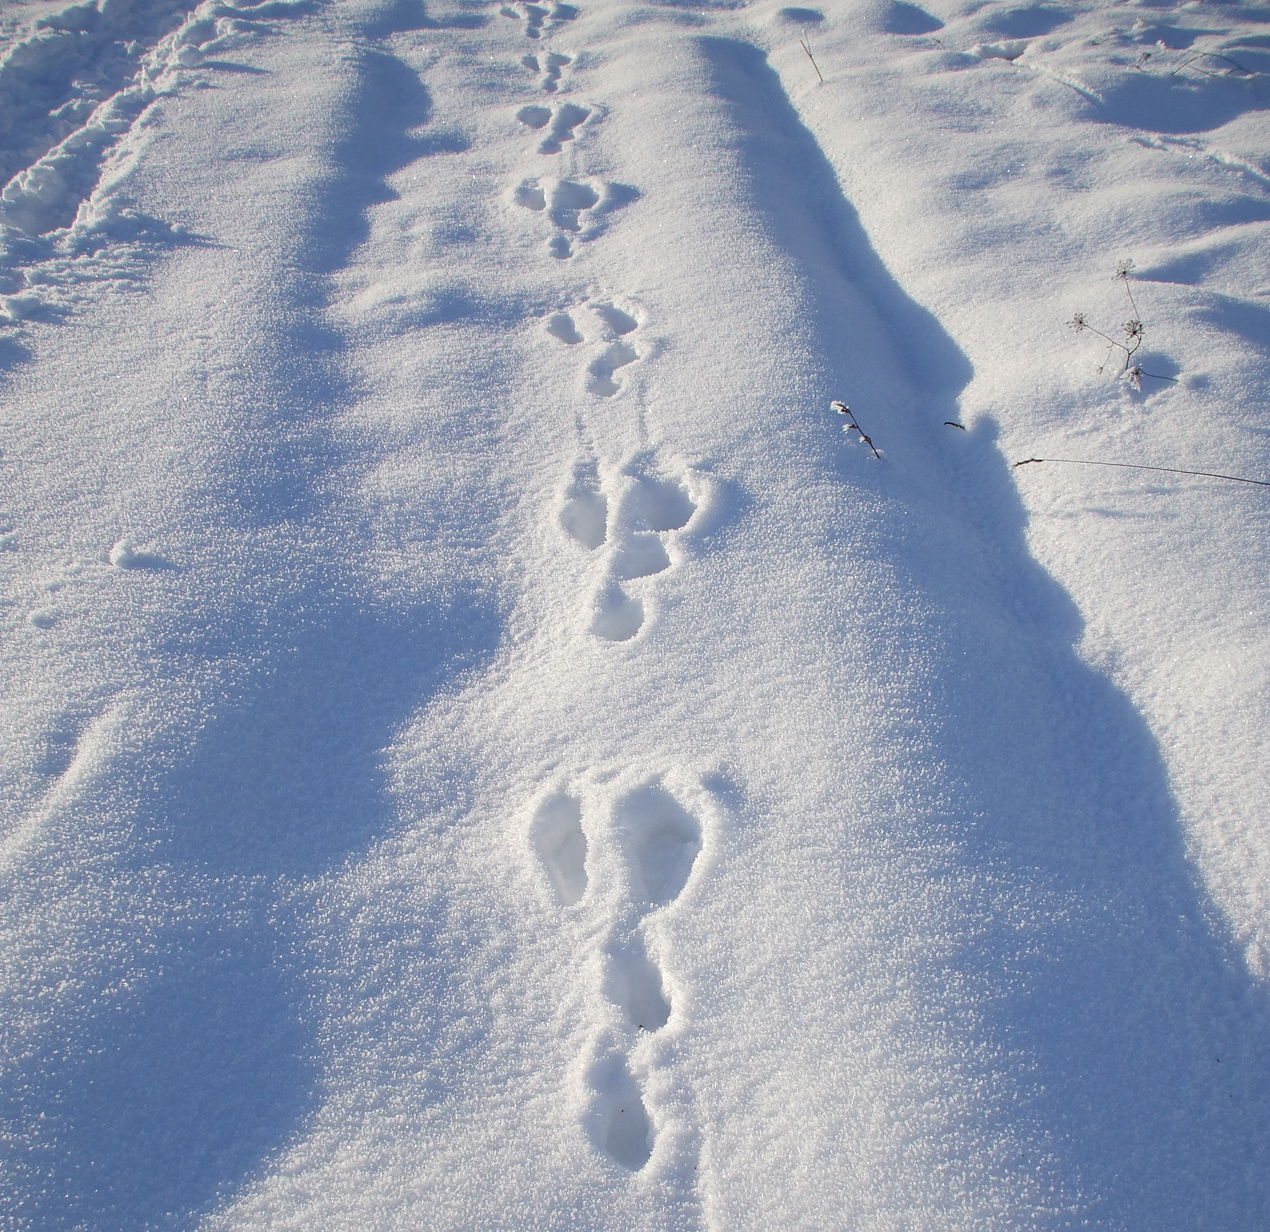 Animal Tracking Quiz, Question 5 - Can you identify this animal track?